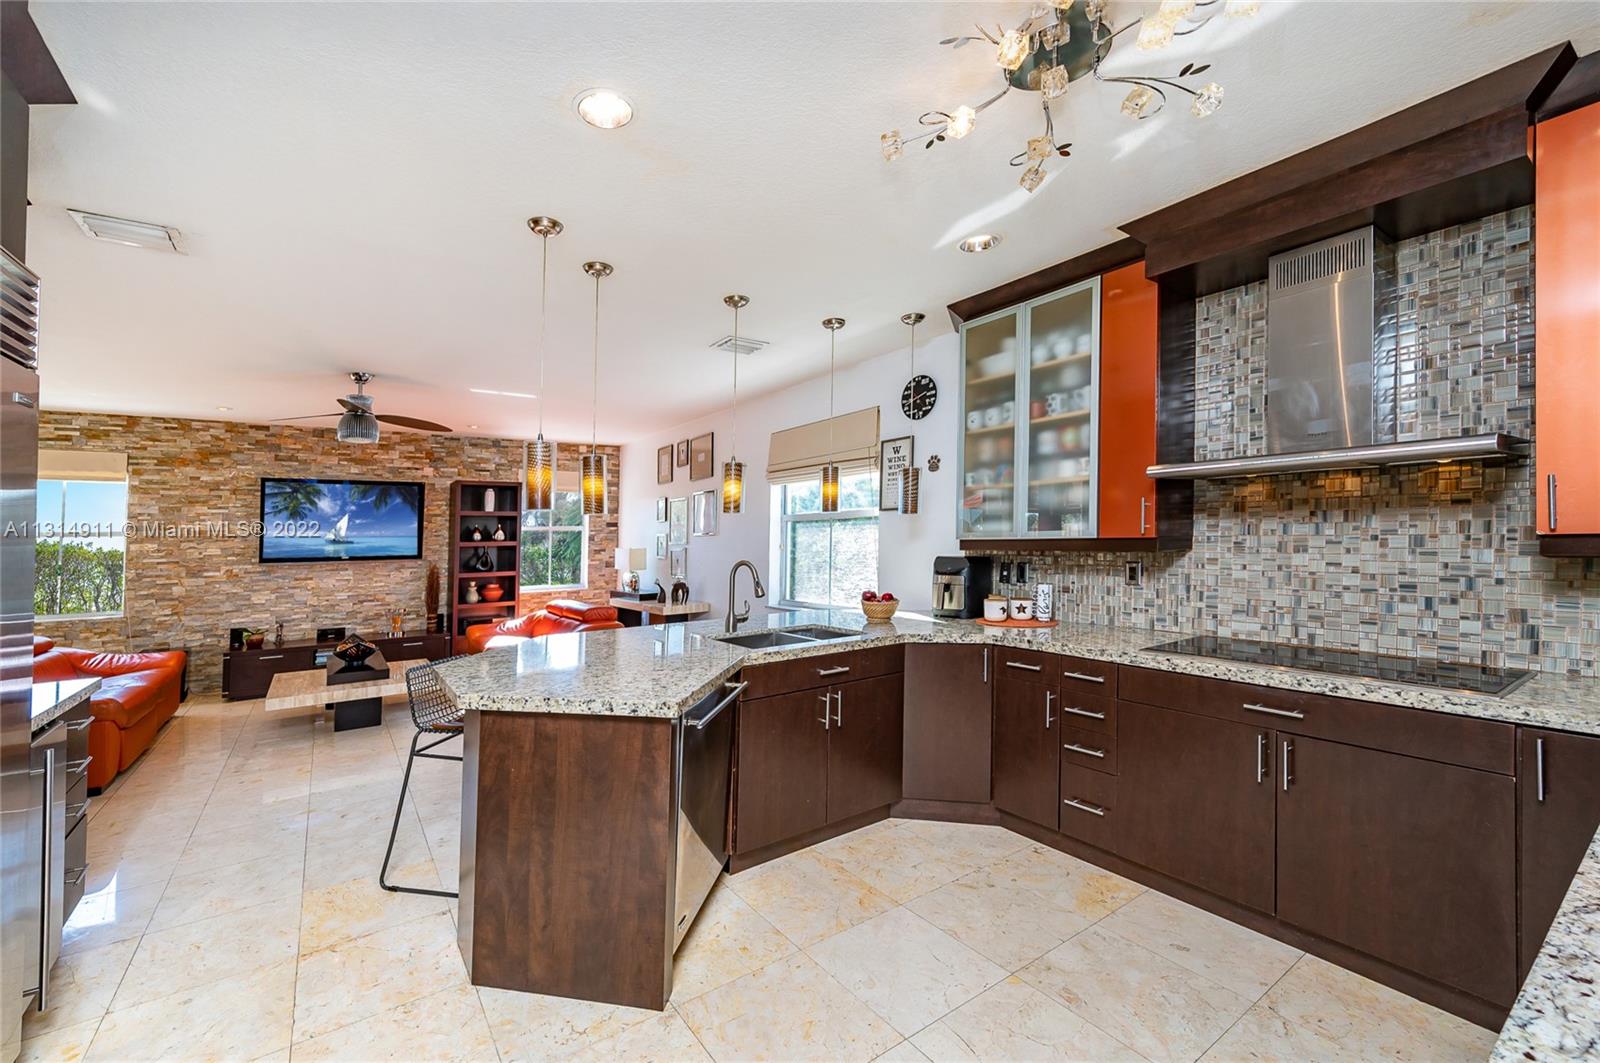 Great open kitchen to the family room